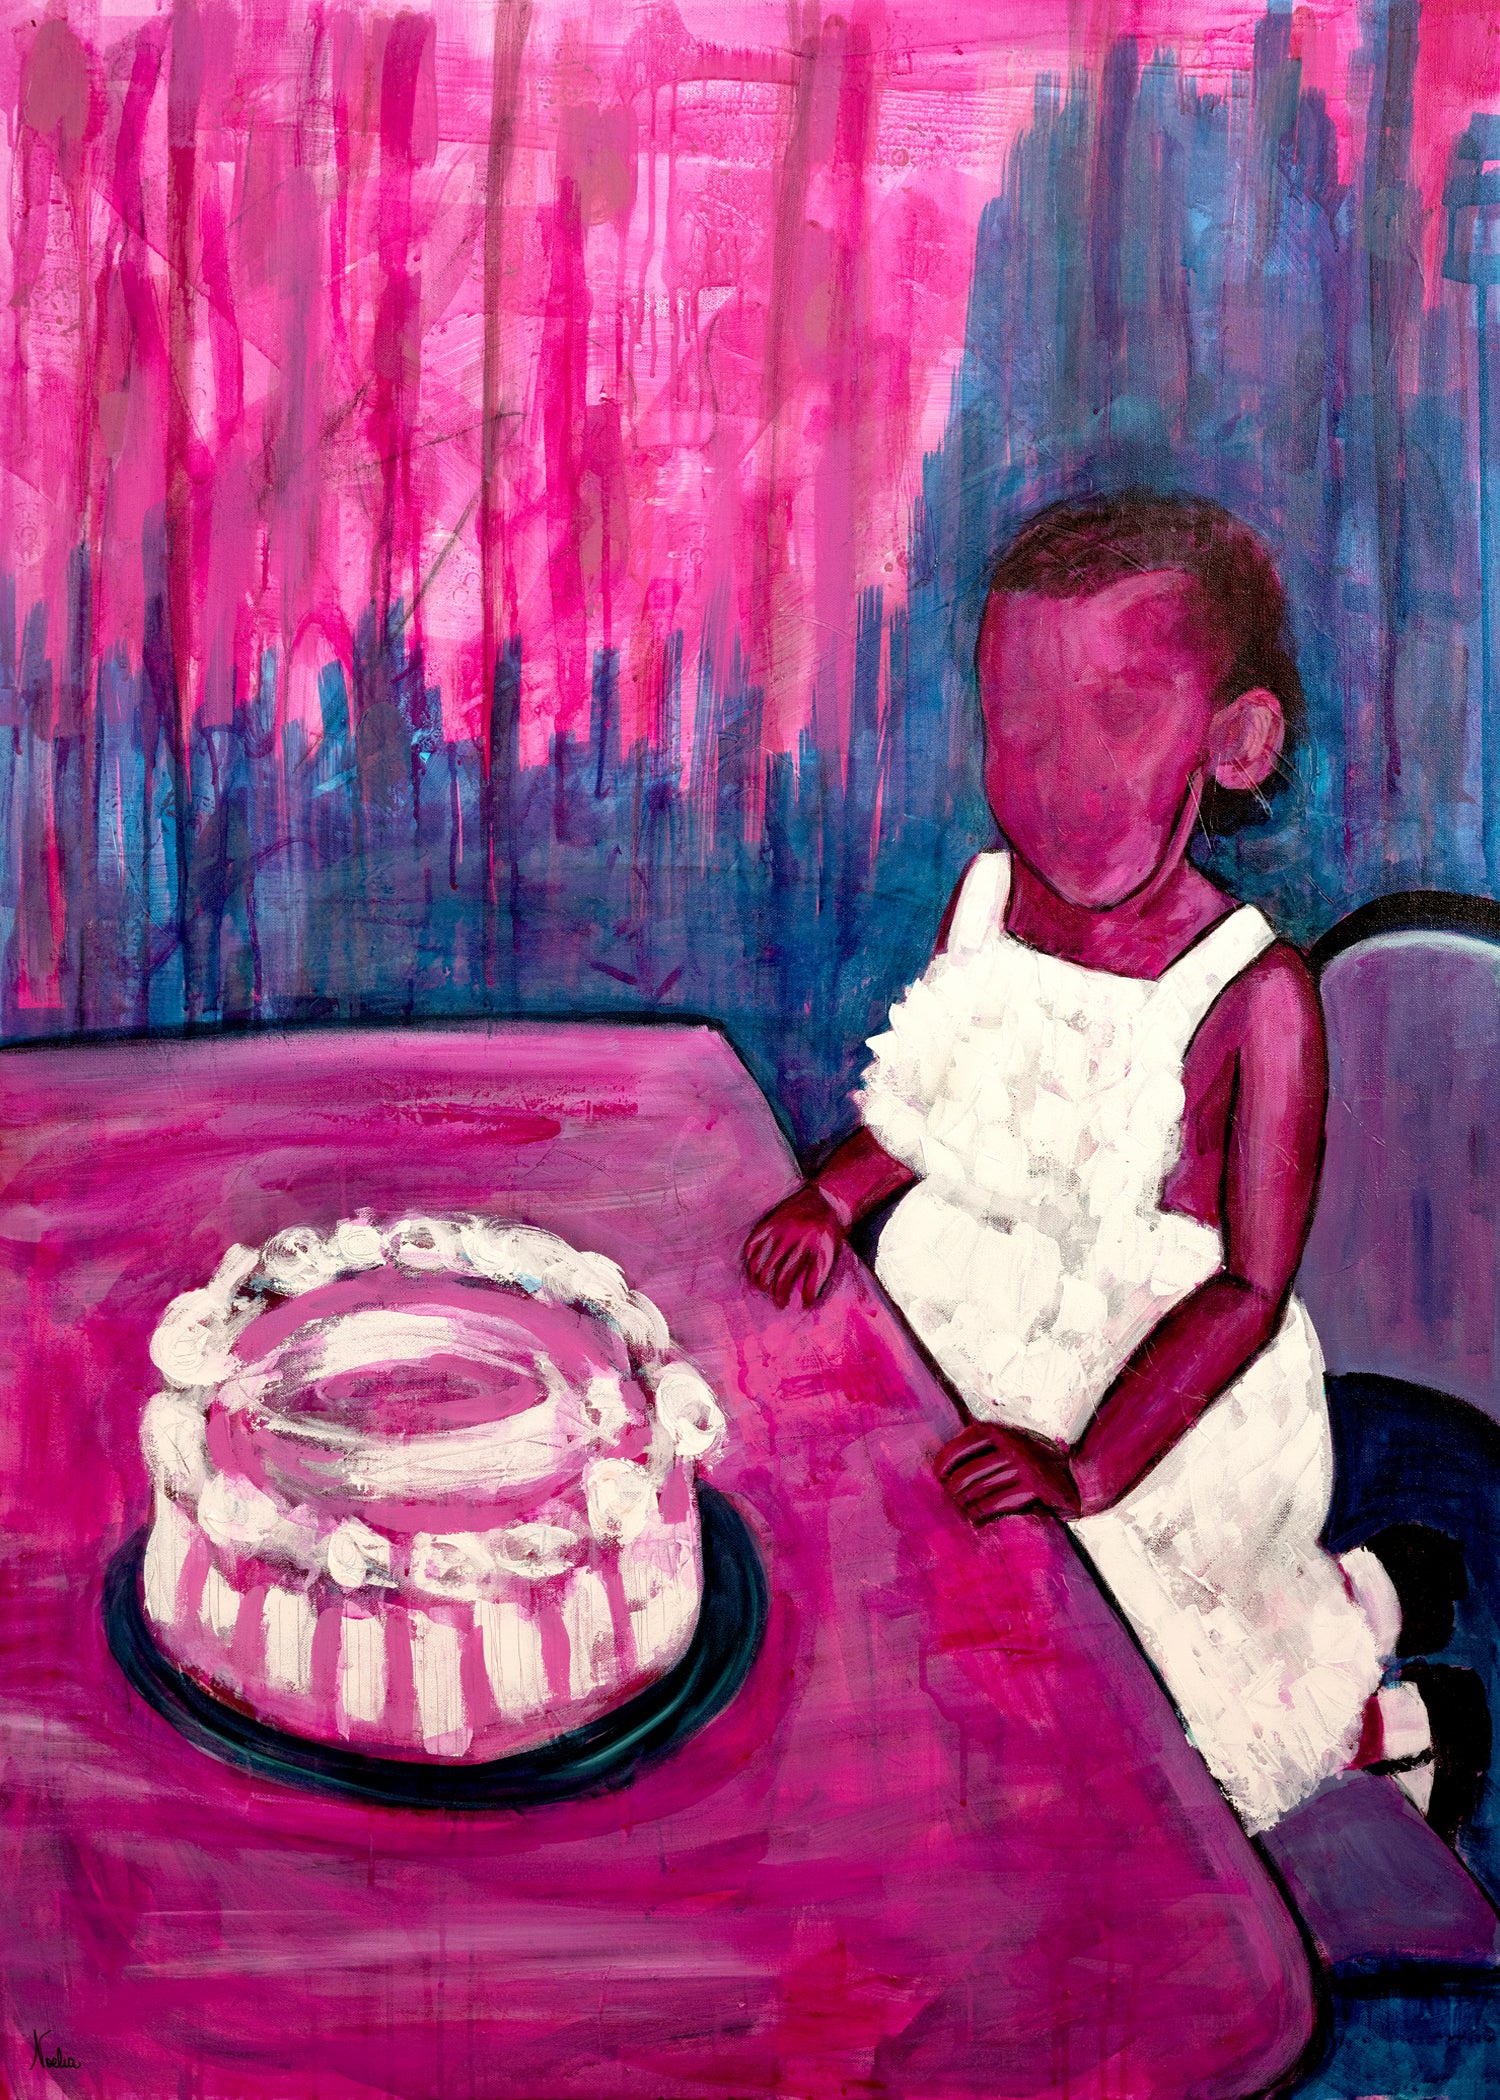 Abstract Pink art of little girl in white dress on a chair by a table with a white birthday cake